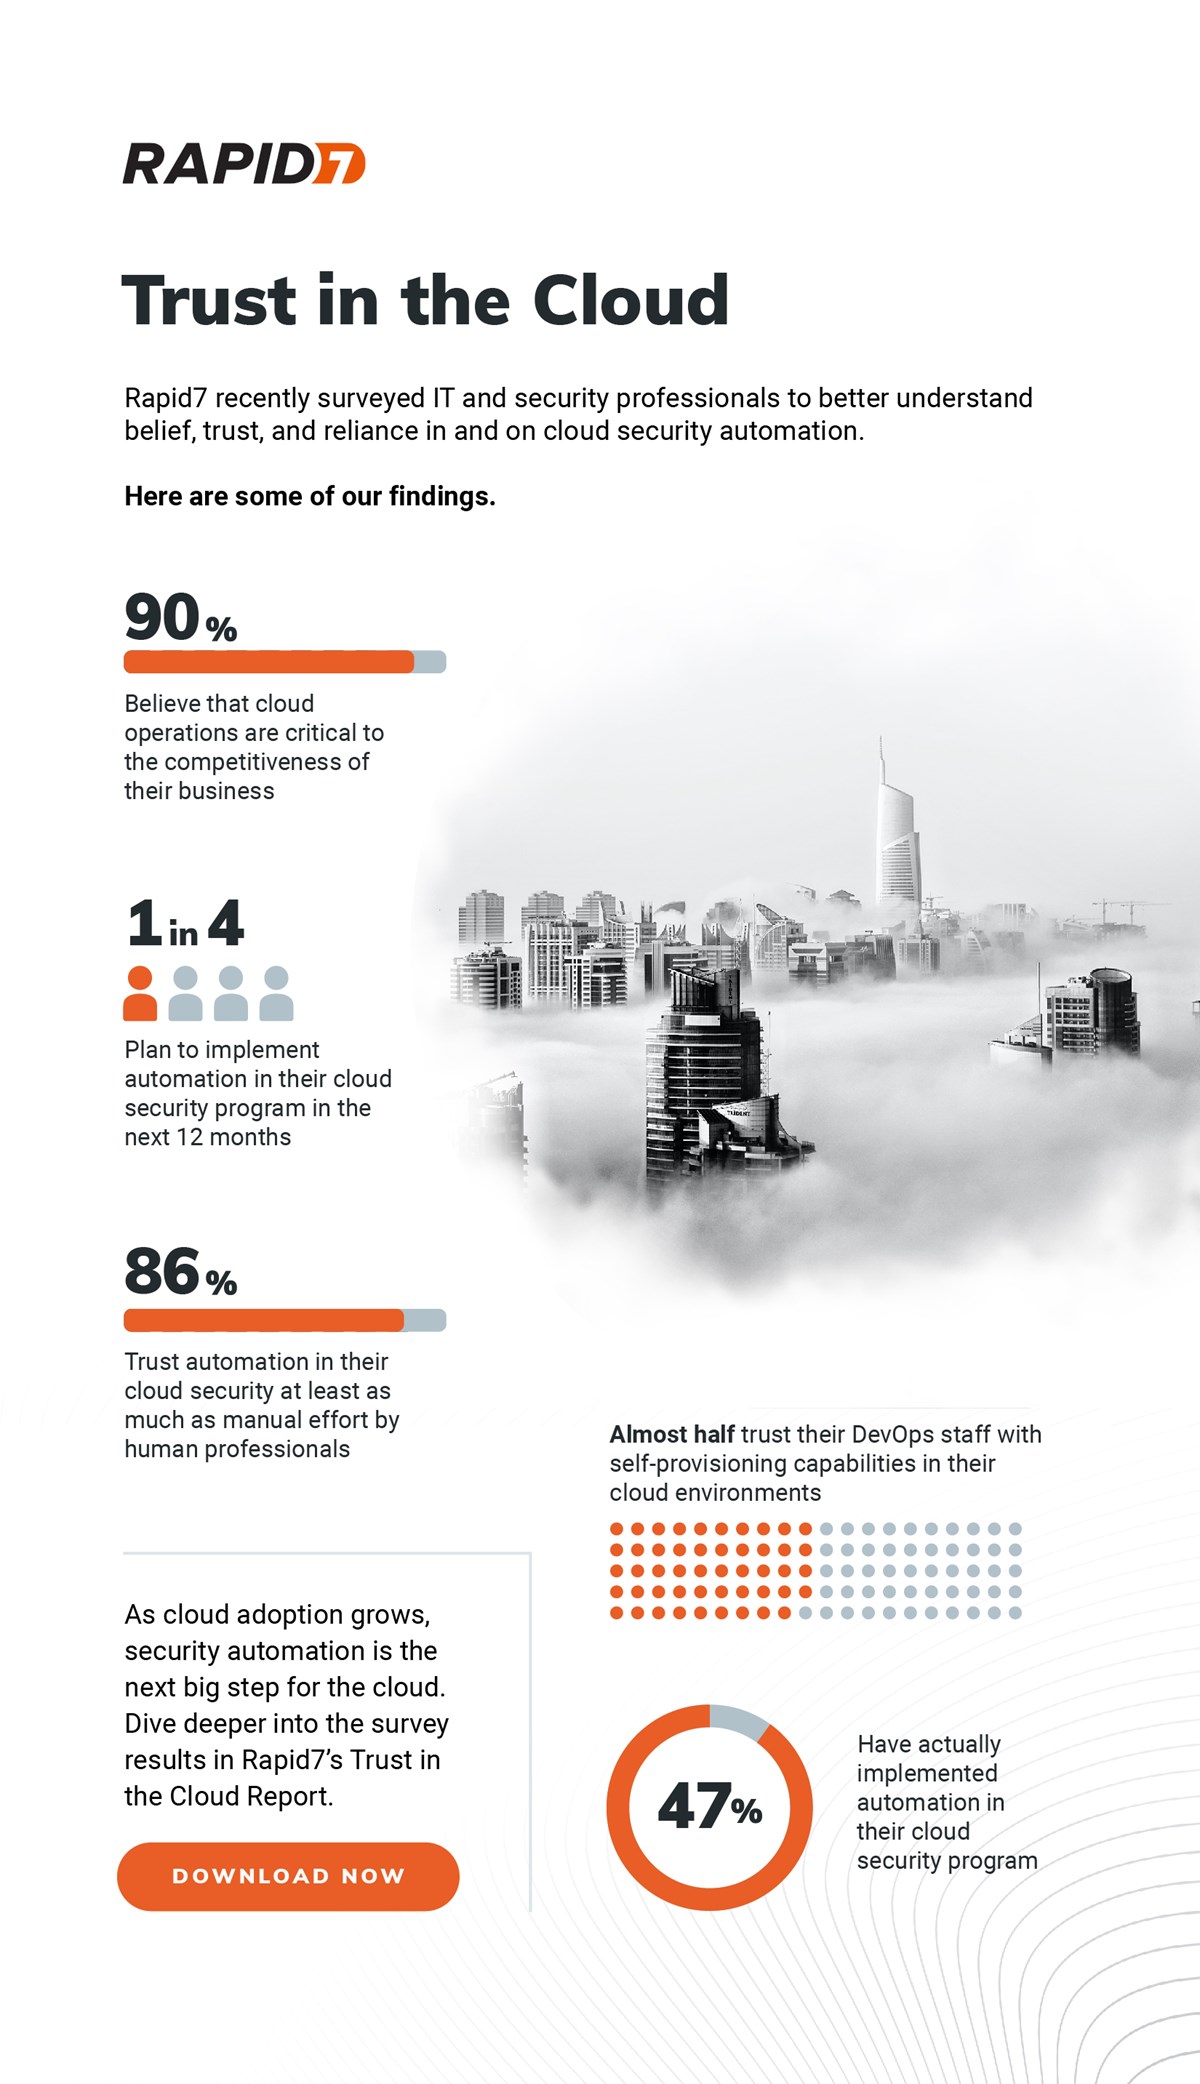 Trust in the Cloud infographic